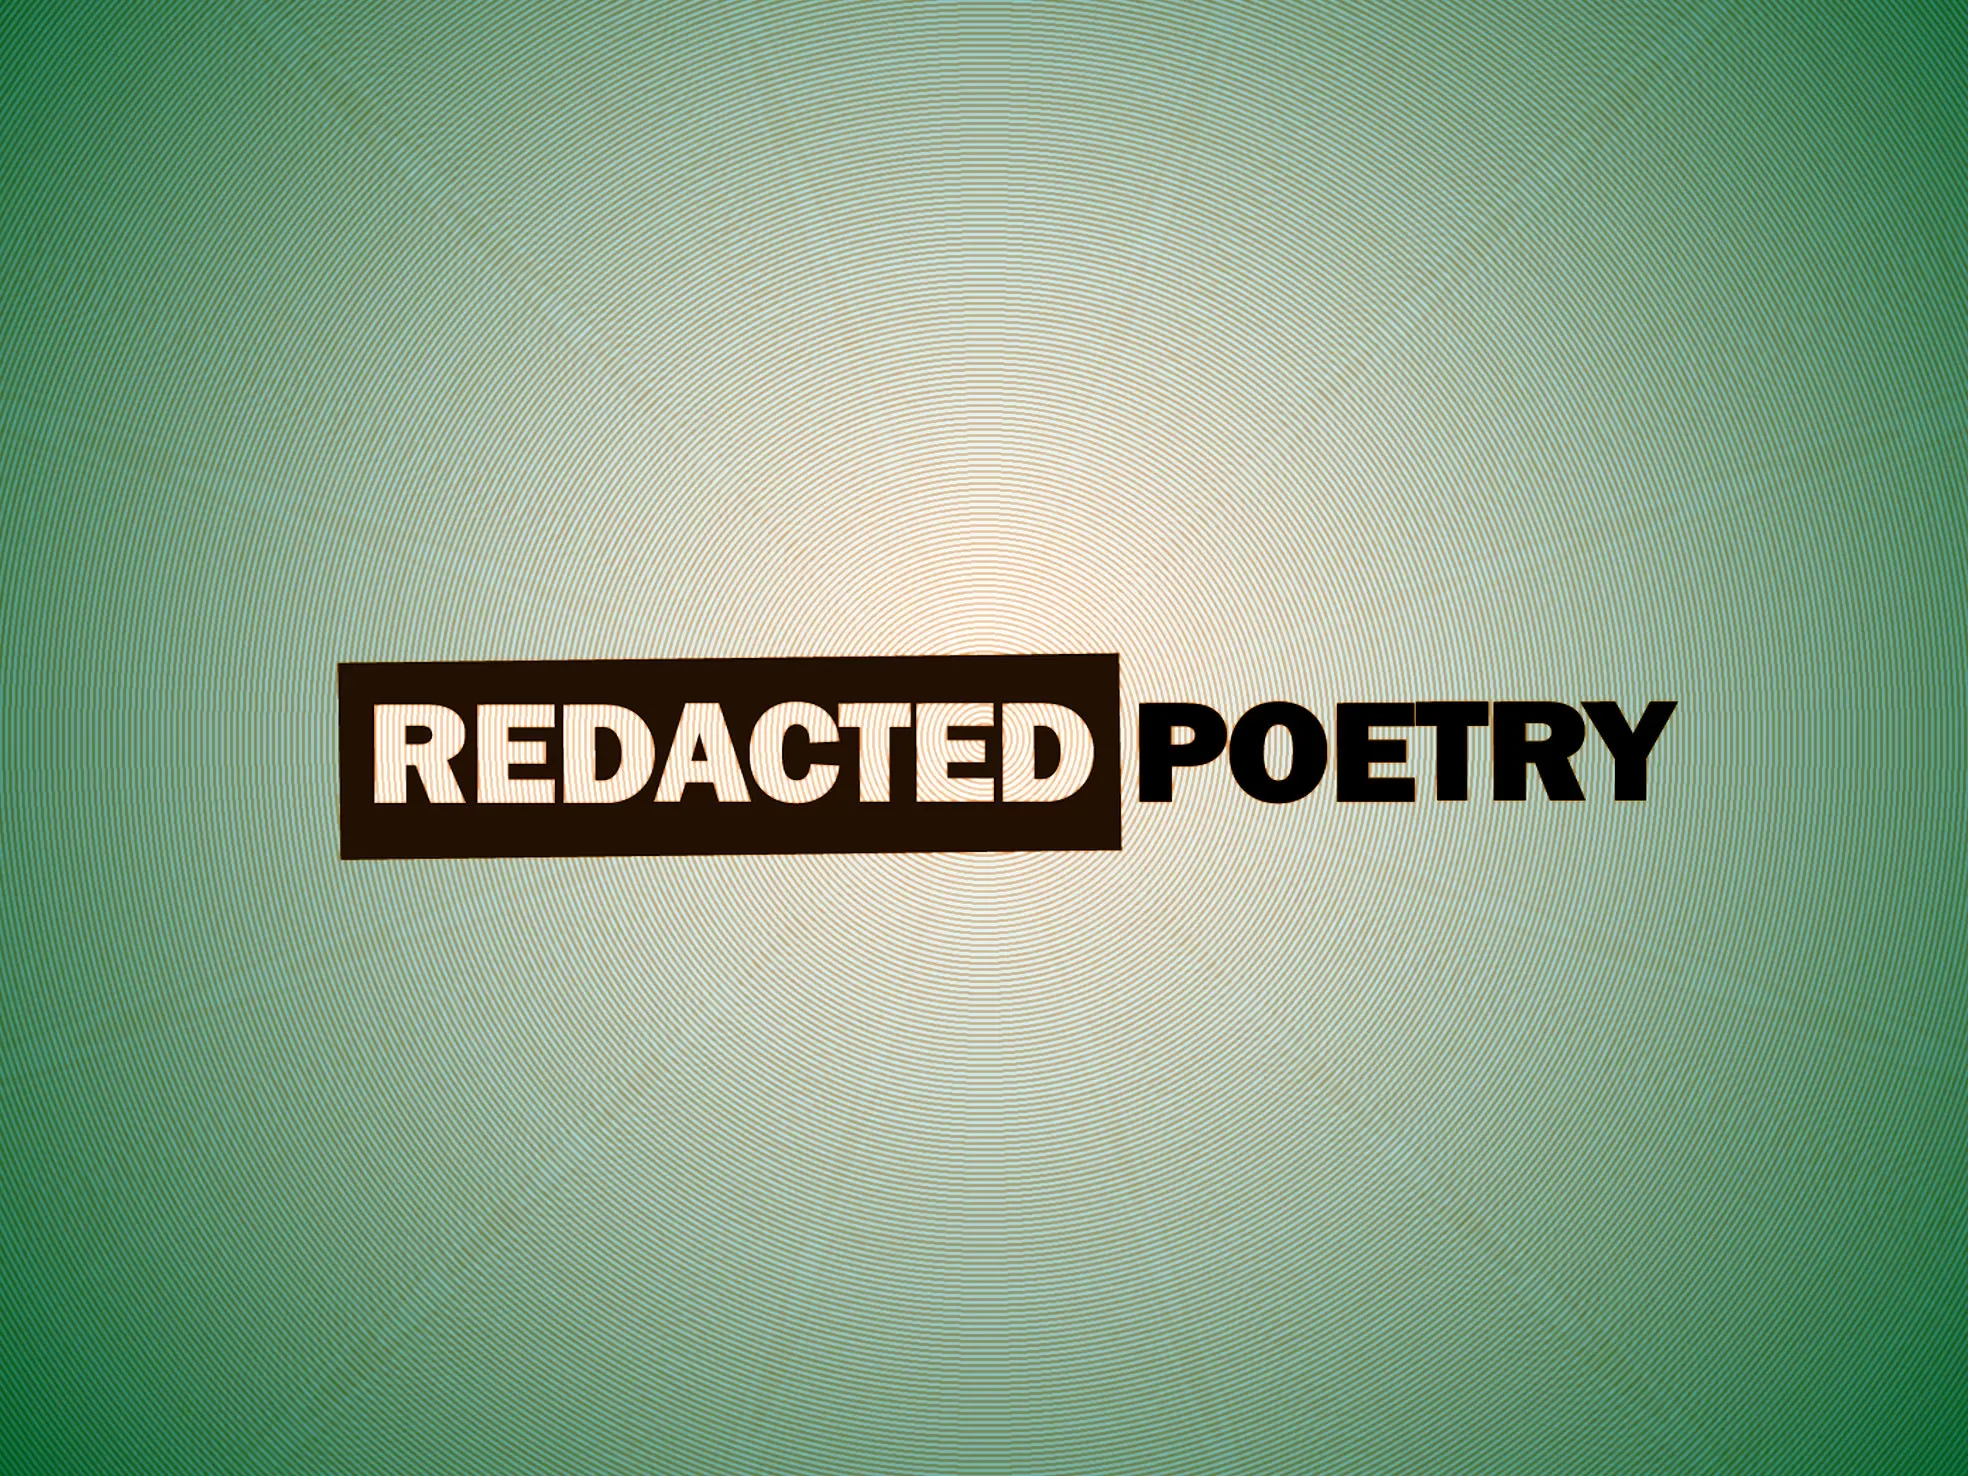 Have you tried Redacted Poetry? It’s fun and a great ice-breaker.